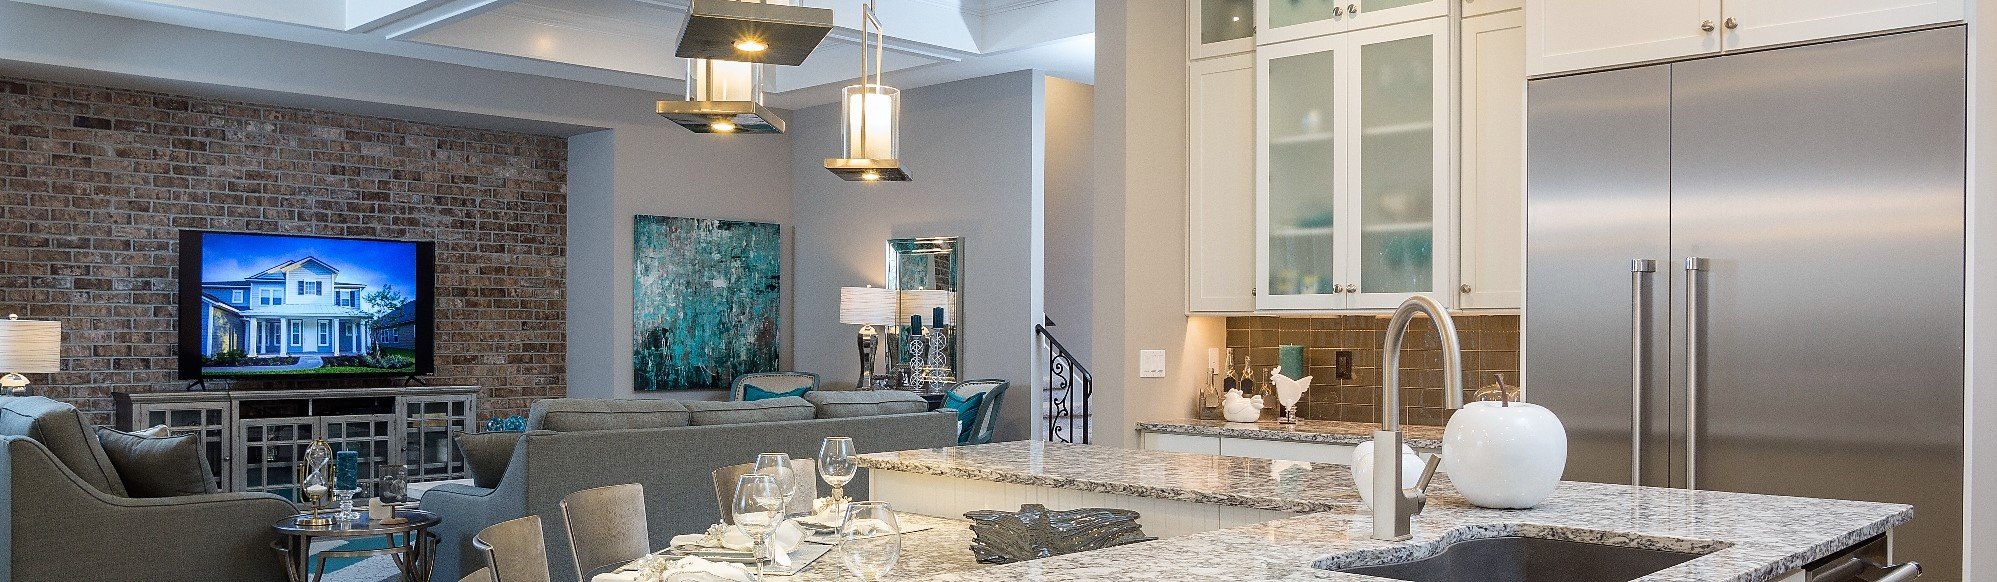 The Monroe Model-Home by Providence Homes in The Outlook at Twenty Mile